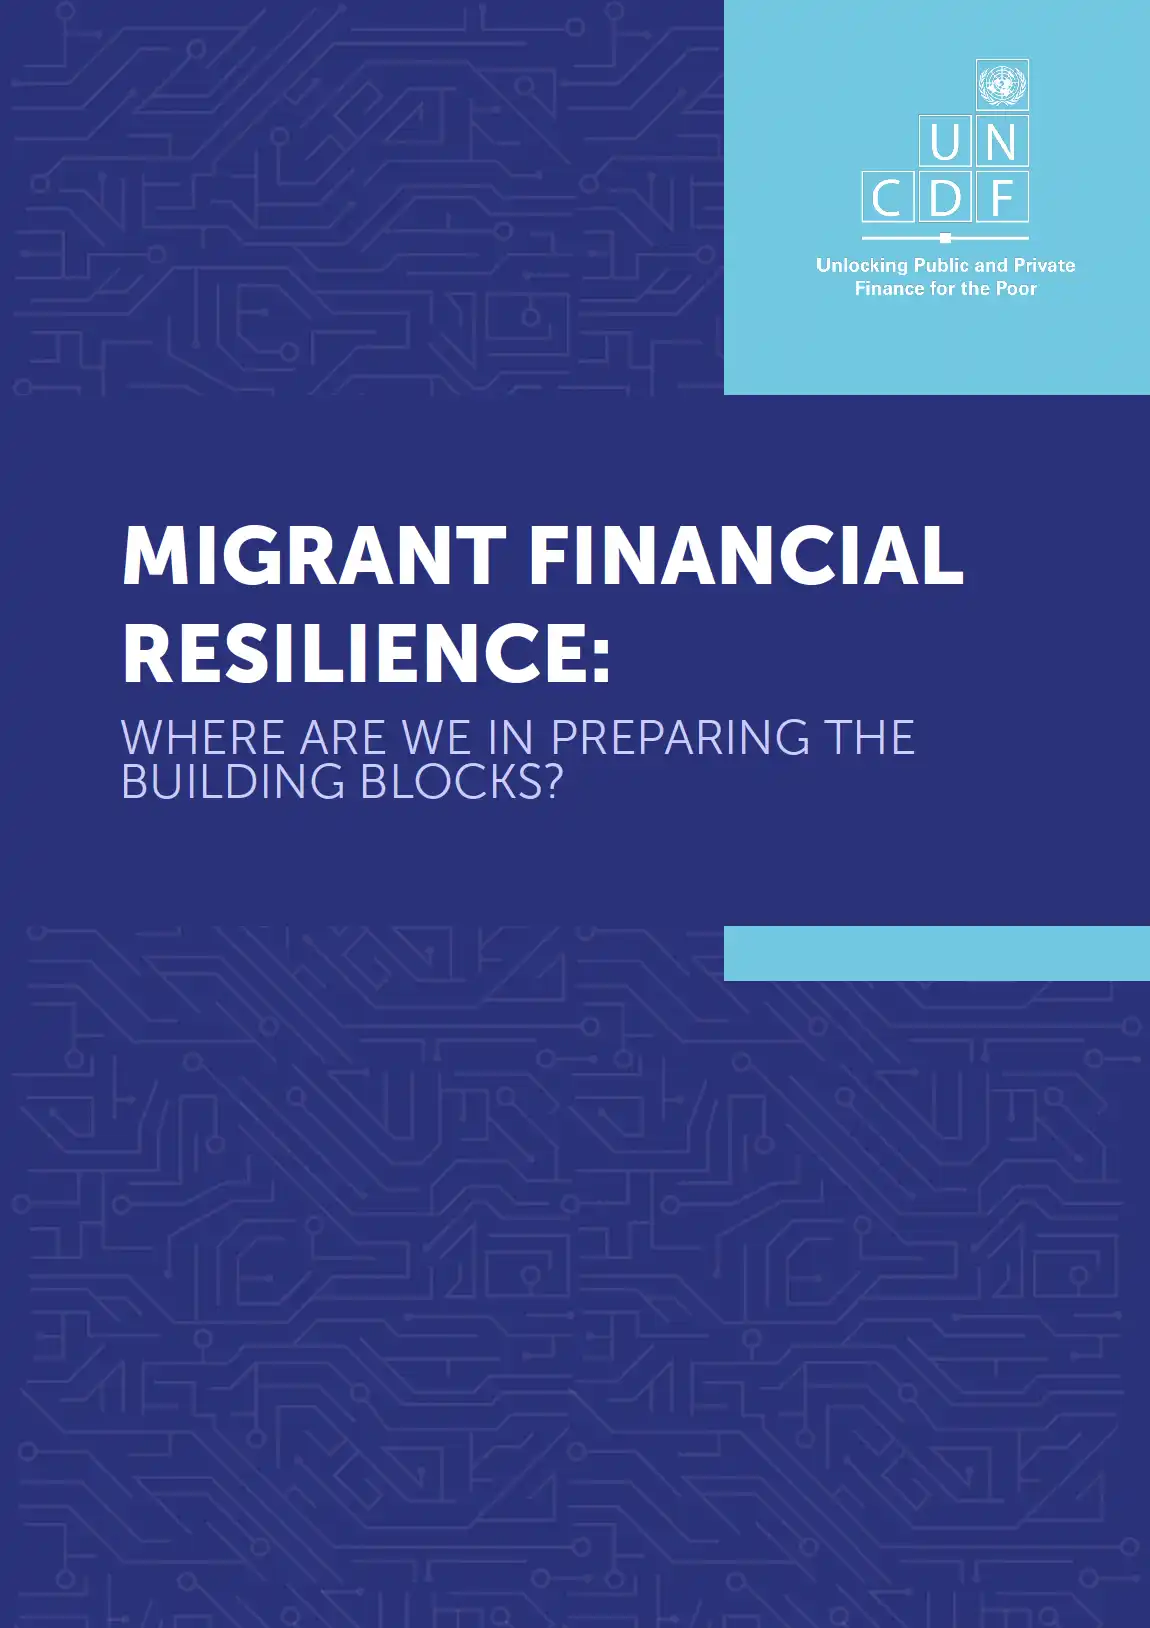 Where Are We in Preparing the Building Blocks for Migrant Financial Resilience?